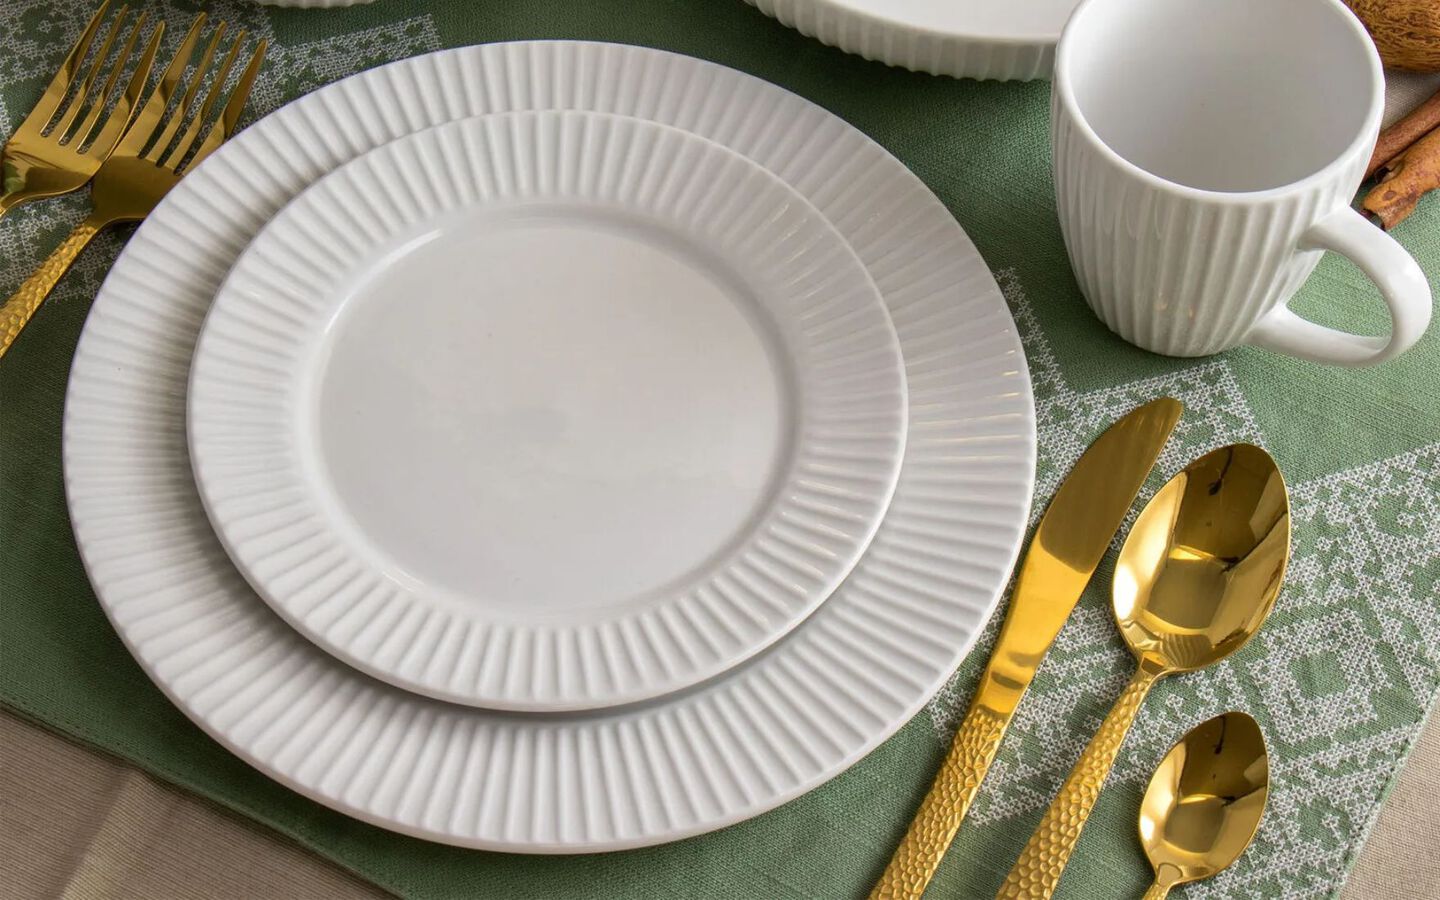 Place setting with white plates, matching cup, gold silverware, and green placemat